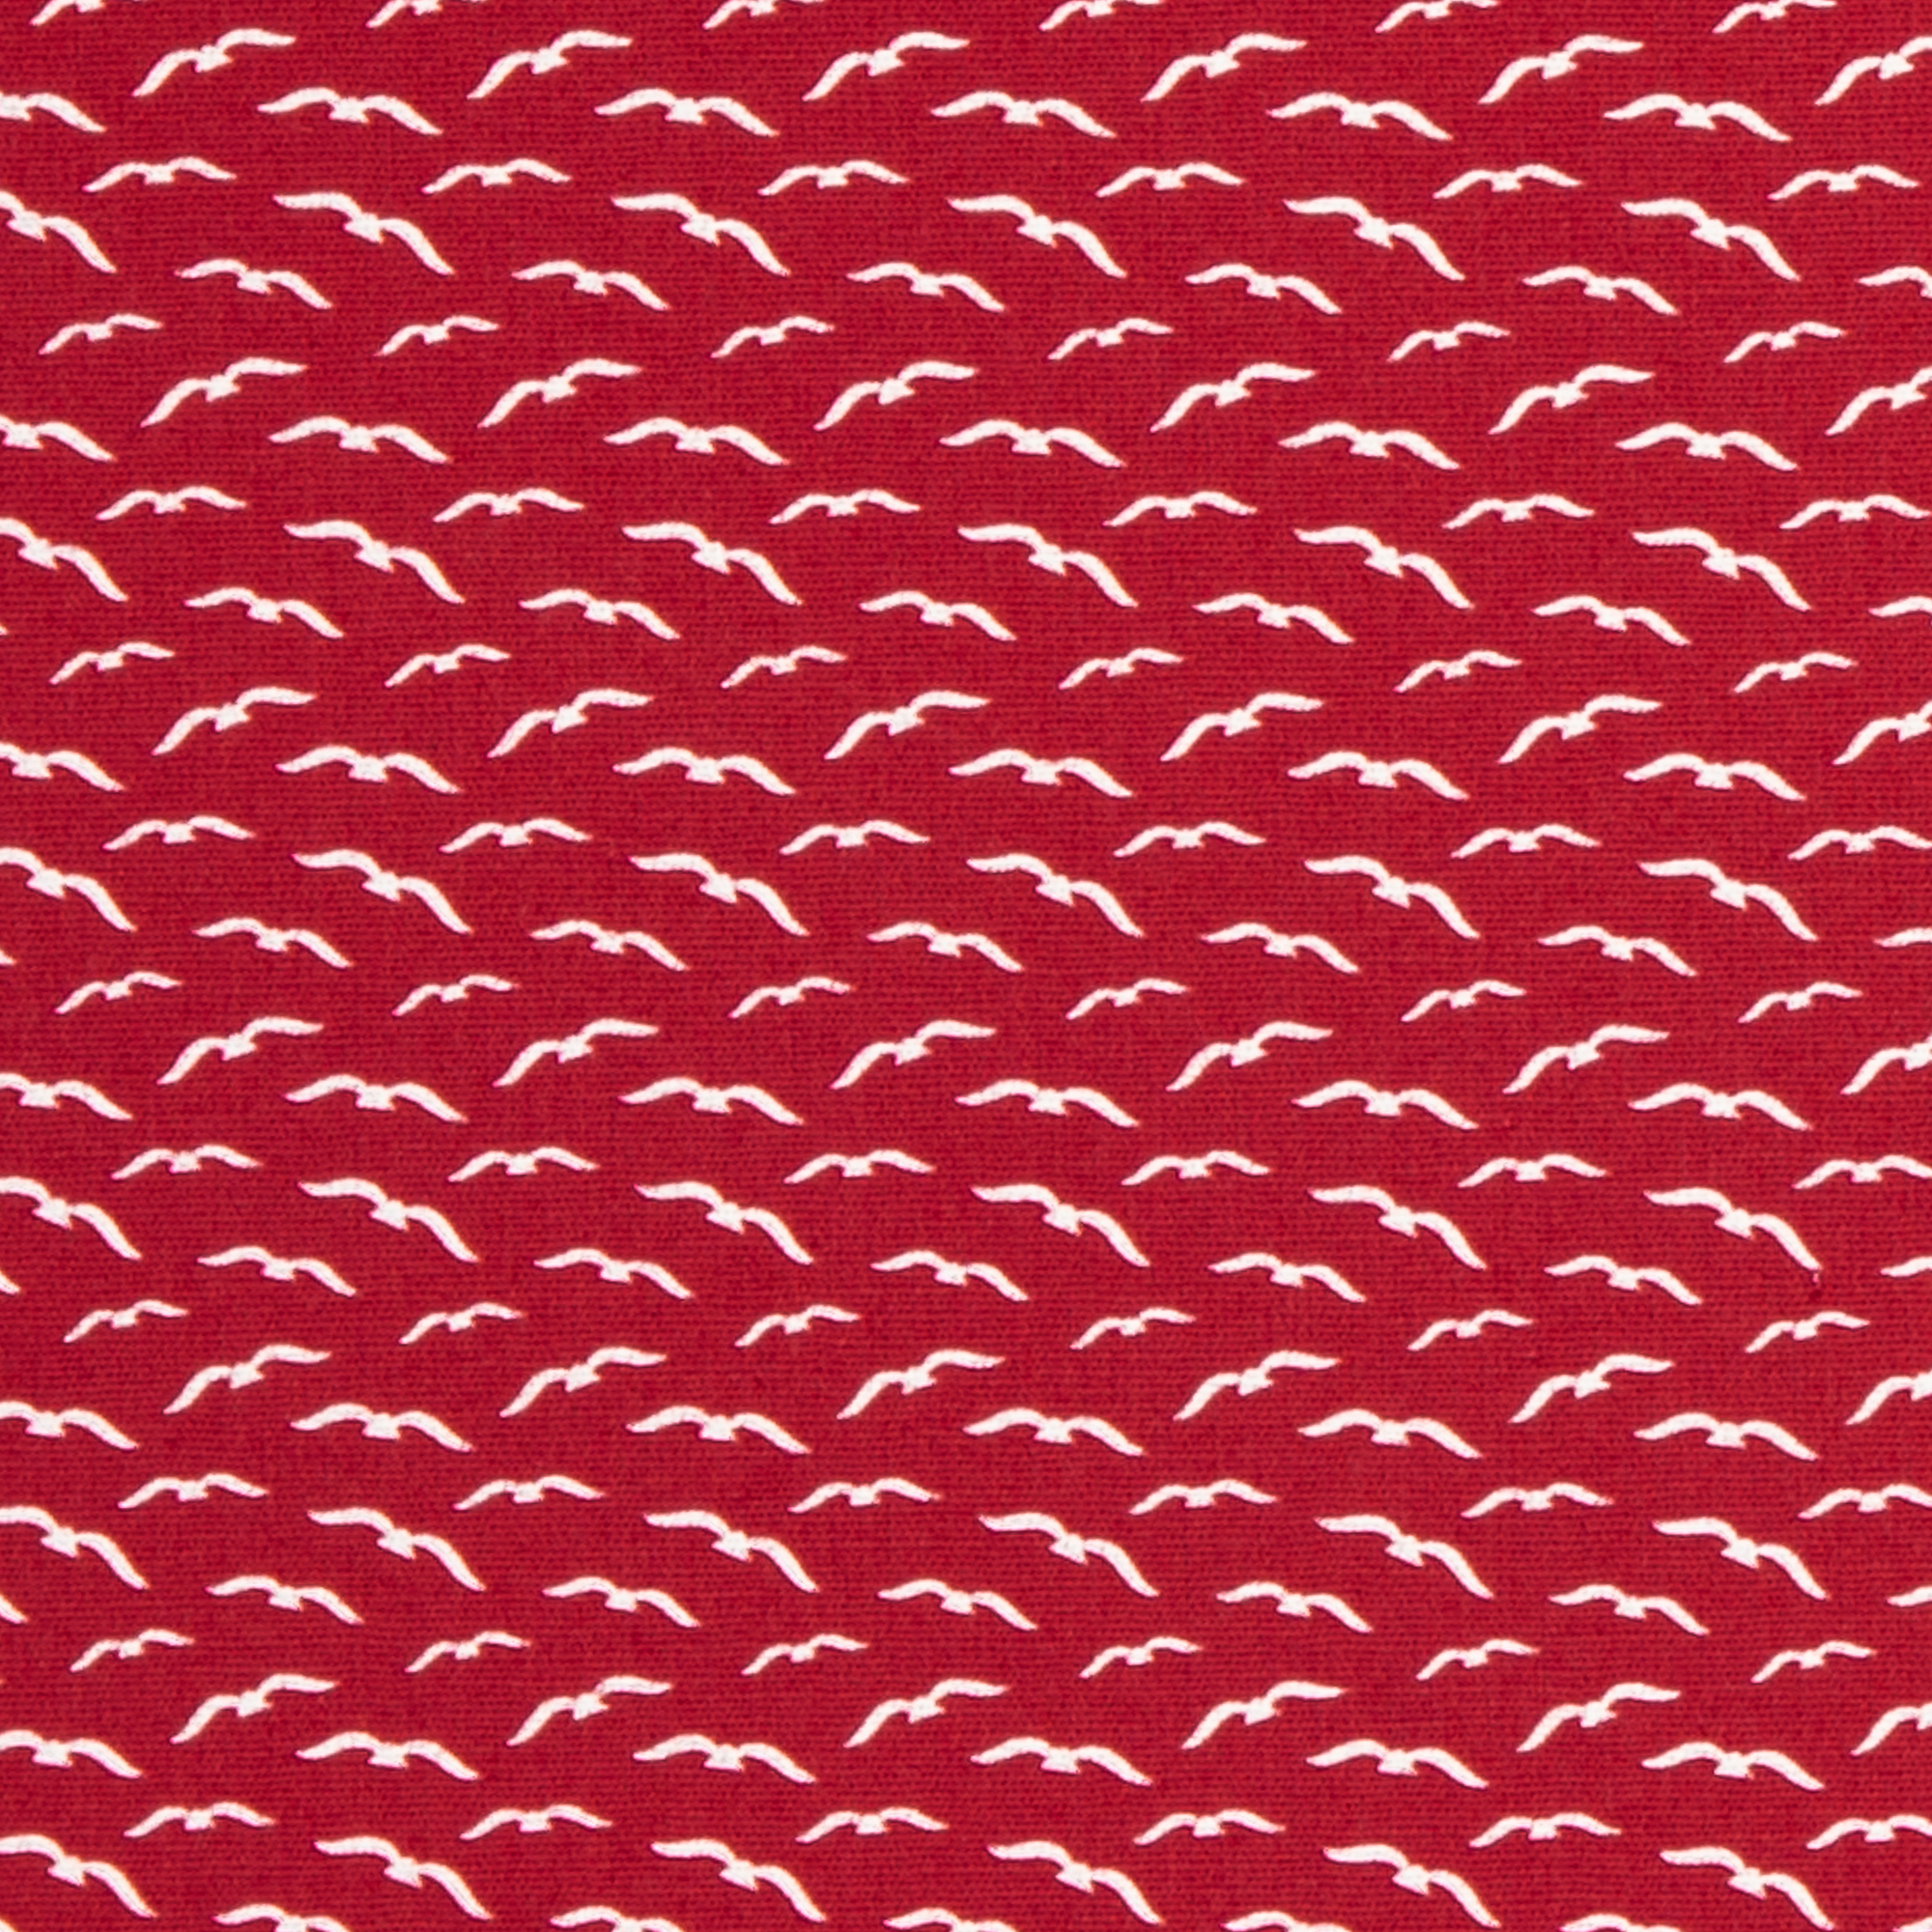 Maritime - Seagulls - red-white